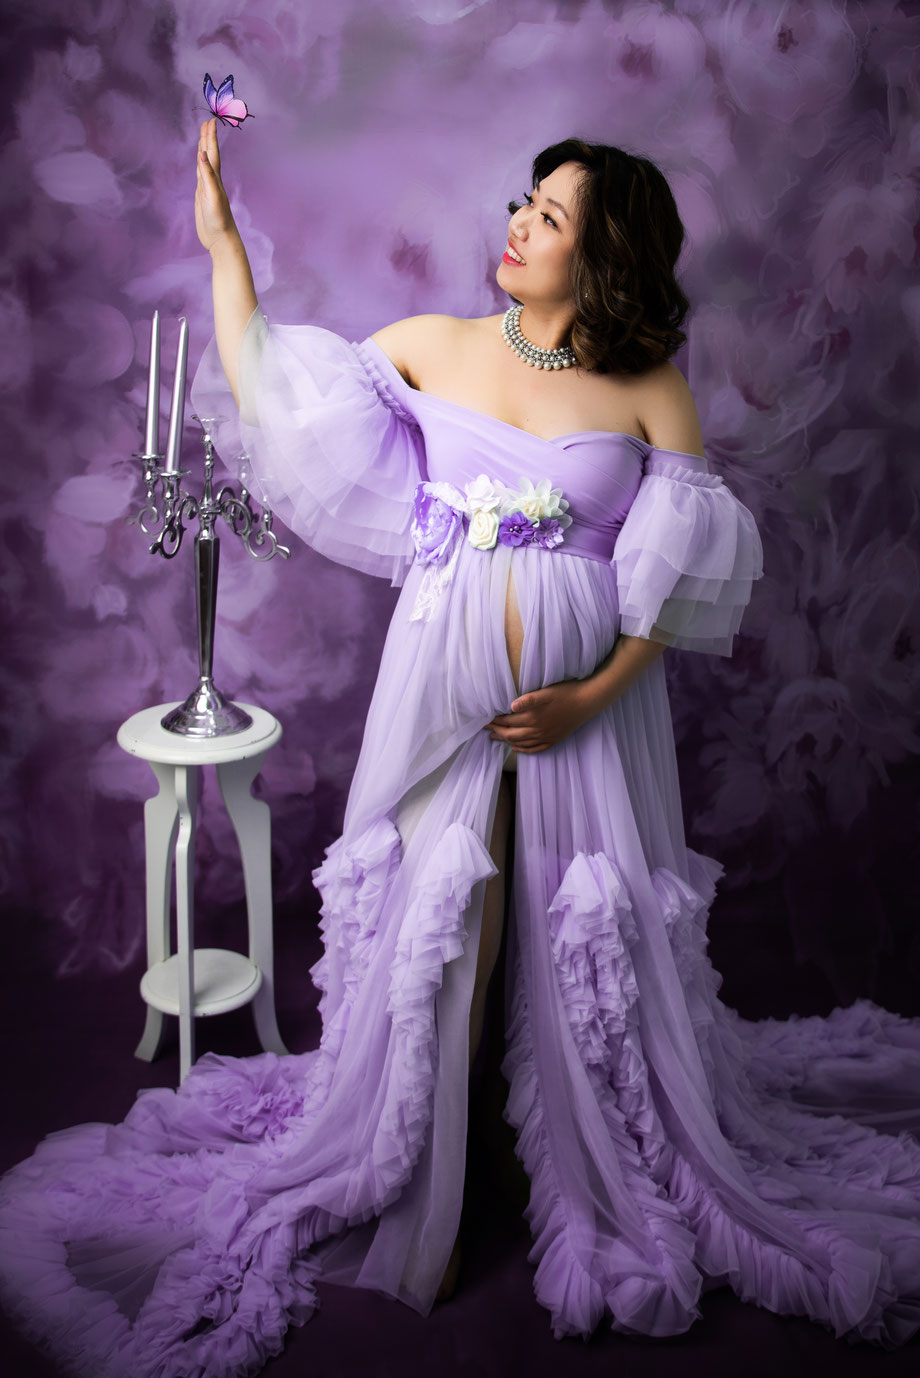 very exclusive purple scenery for pregnancy shoot